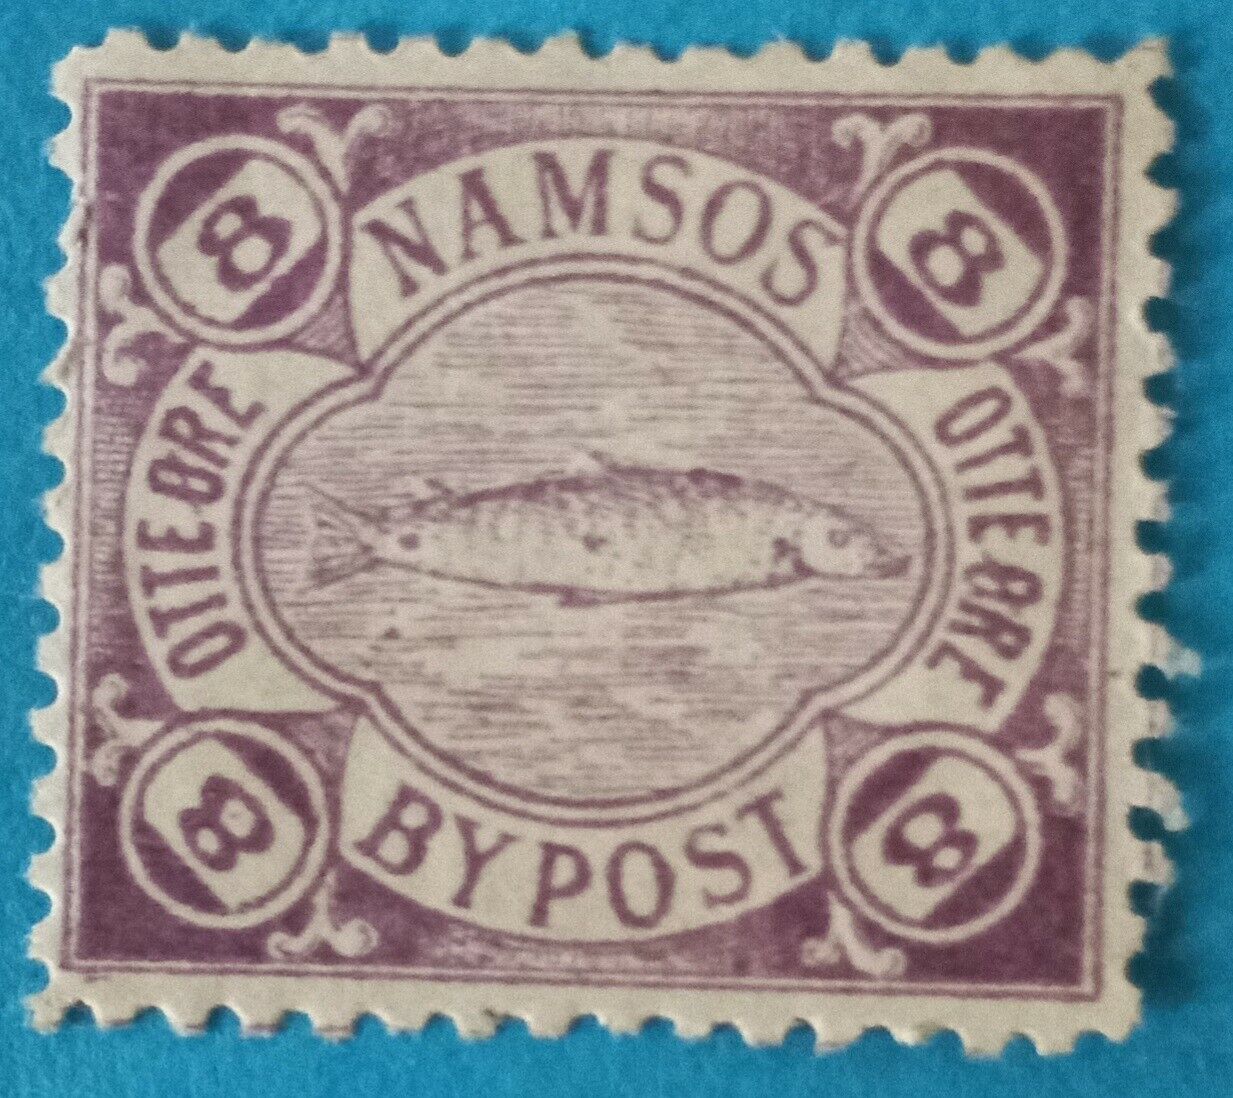 Outlet sale feature + 1888 Namsos Norway Atlantic Codfish ByPost Pictures A#3 S Daily bargain sale 8ore